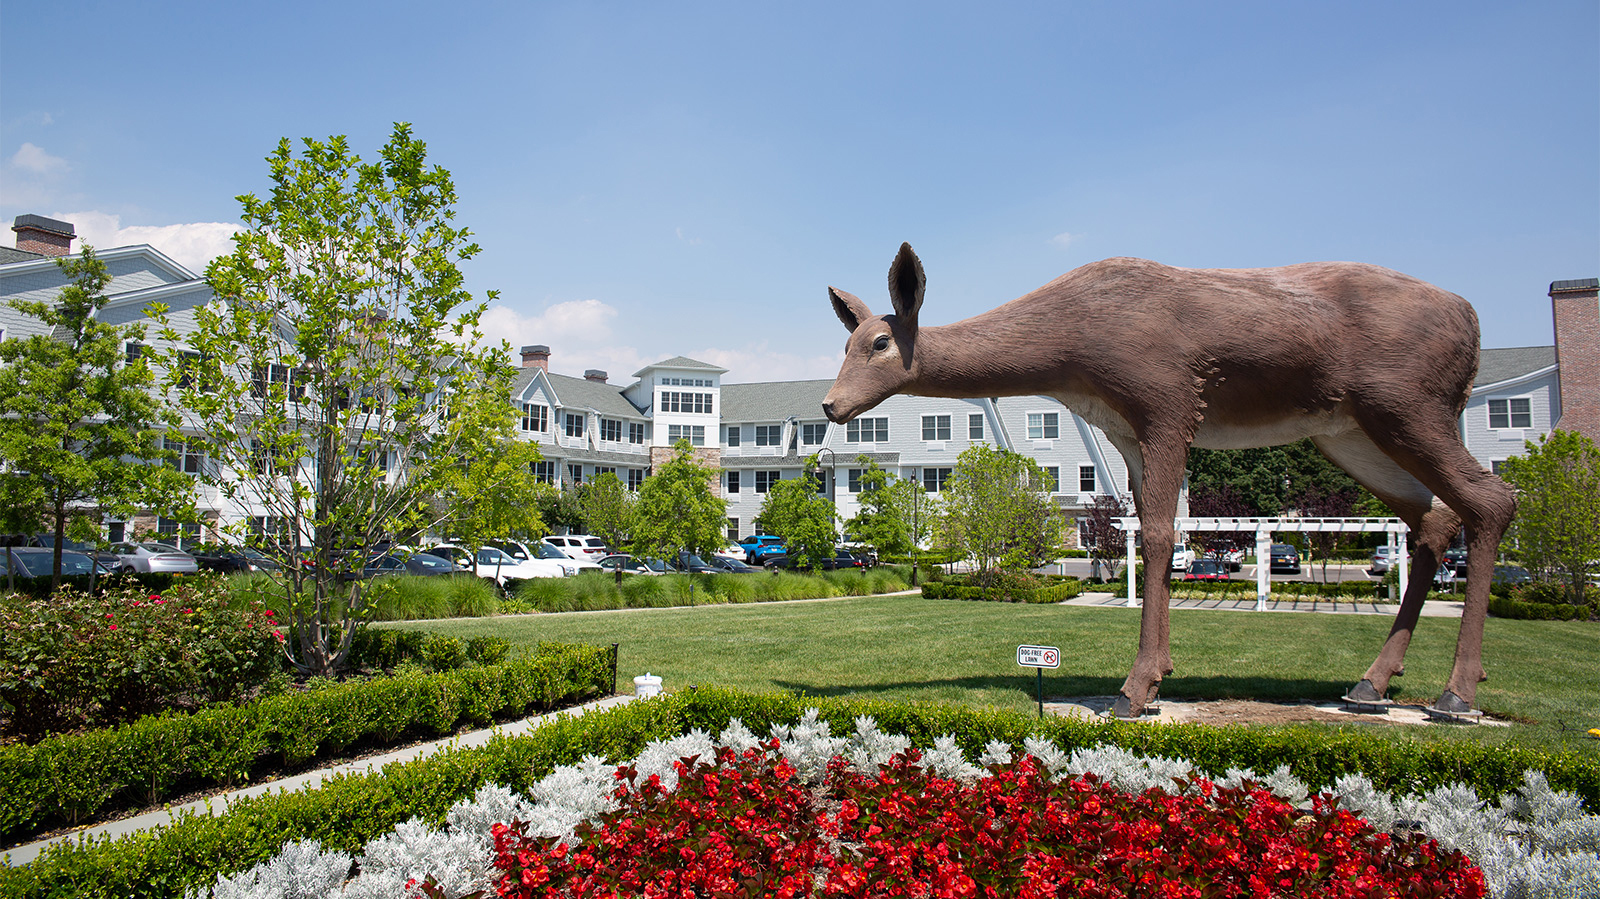 The giant deer sculpture headed to Hampton Bays has been 'grazing' at a luxury apartment complex in Amityville.